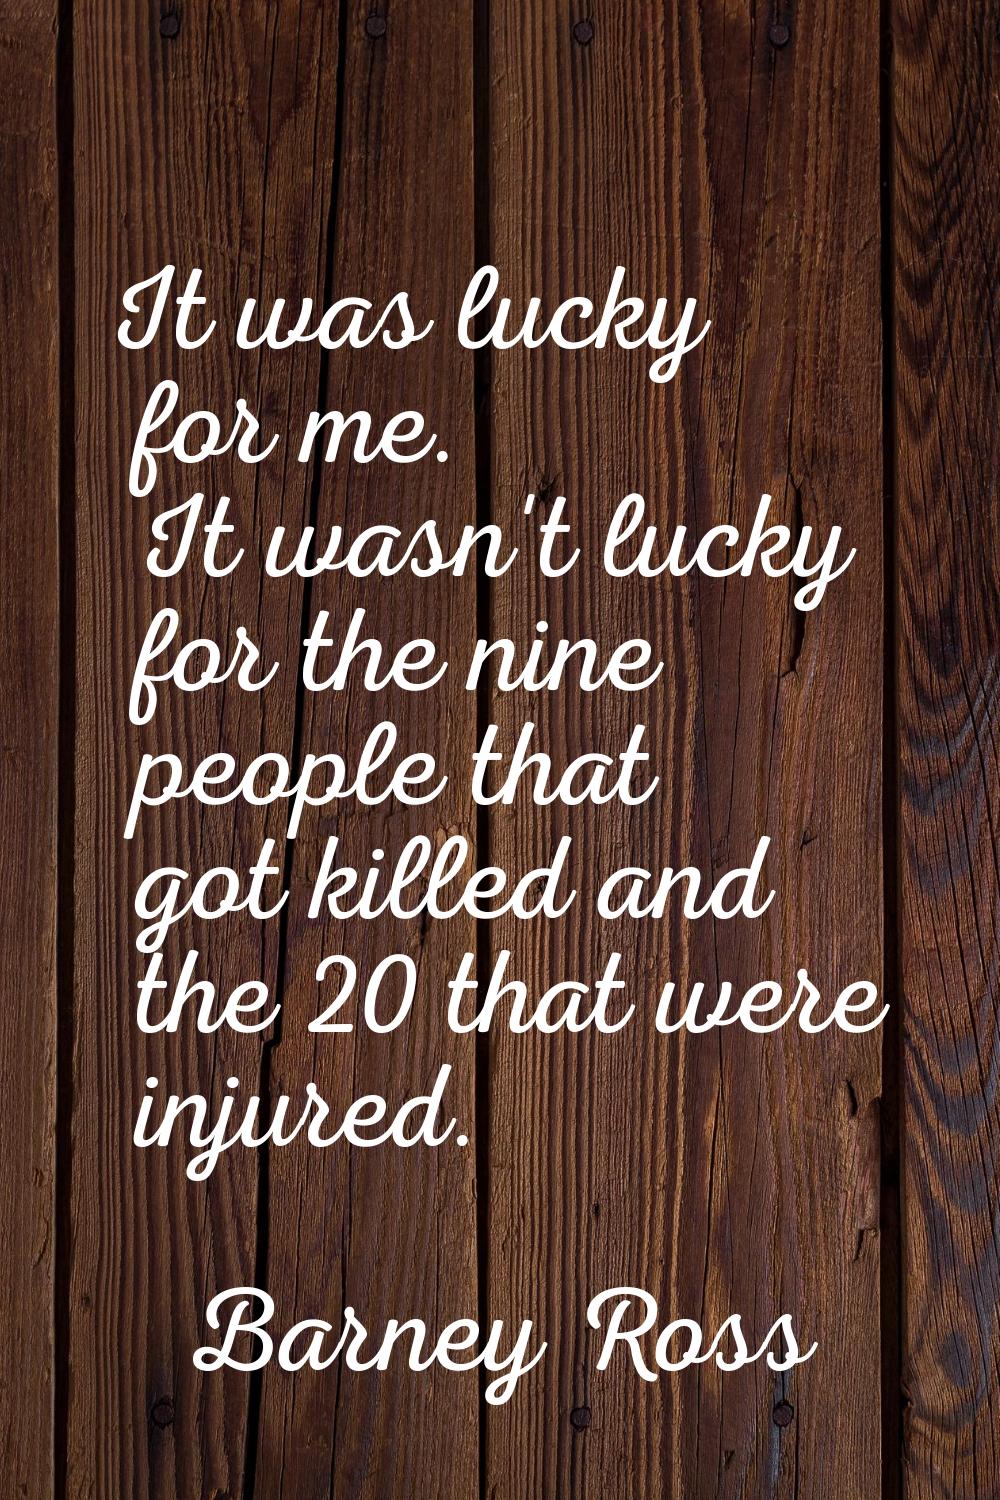 It was lucky for me. It wasn't lucky for the nine people that got killed and the 20 that were injur